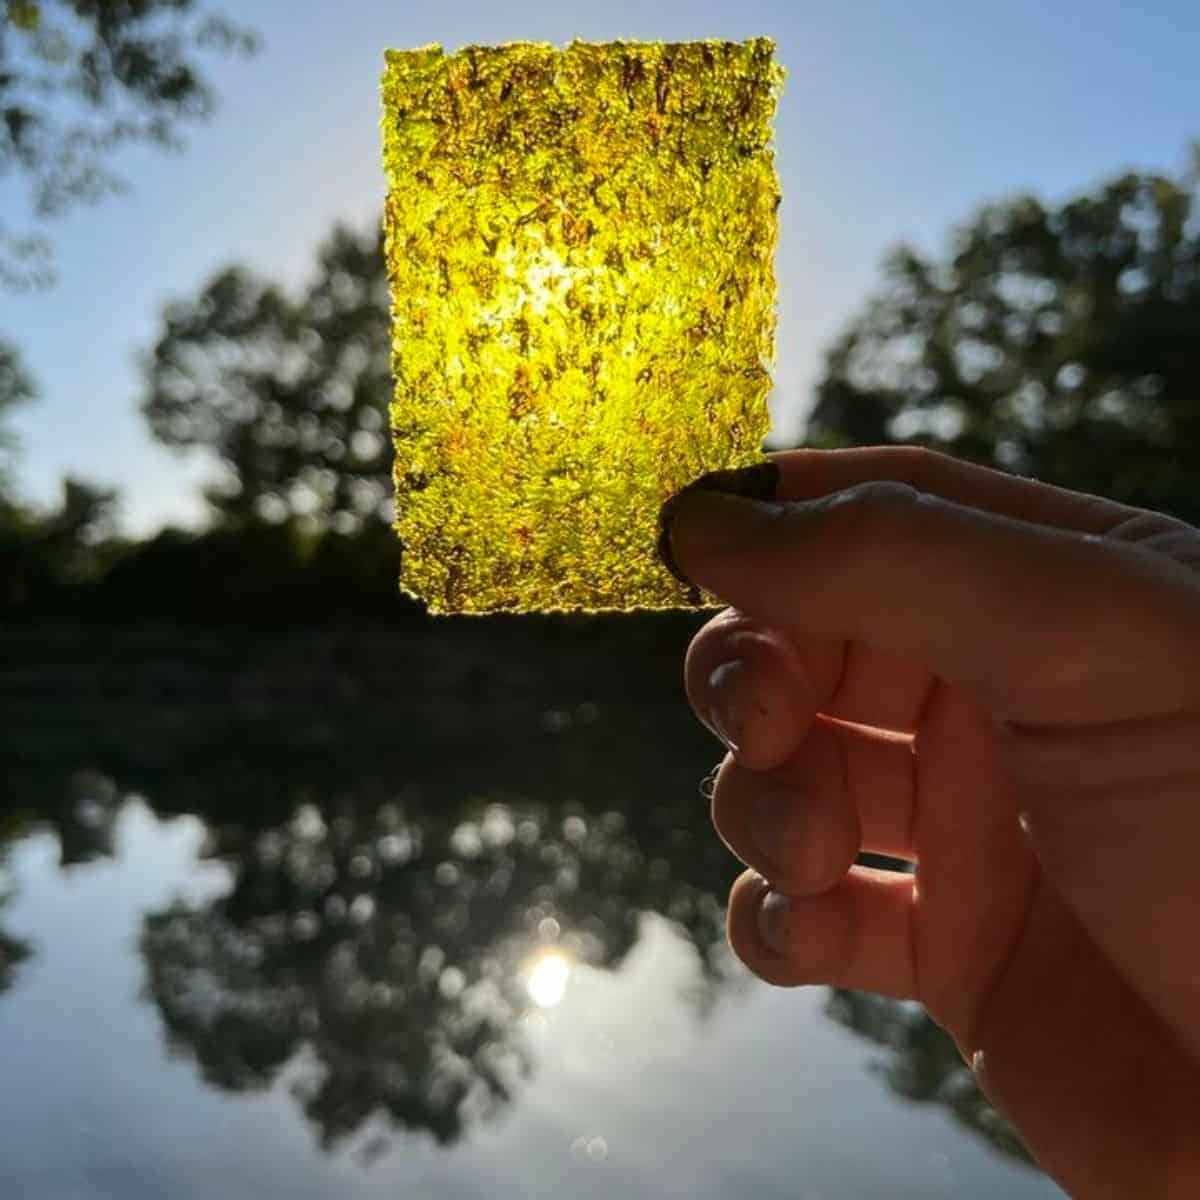 A stained glass like crispy dried seaweed in a beautiful scenery of nature